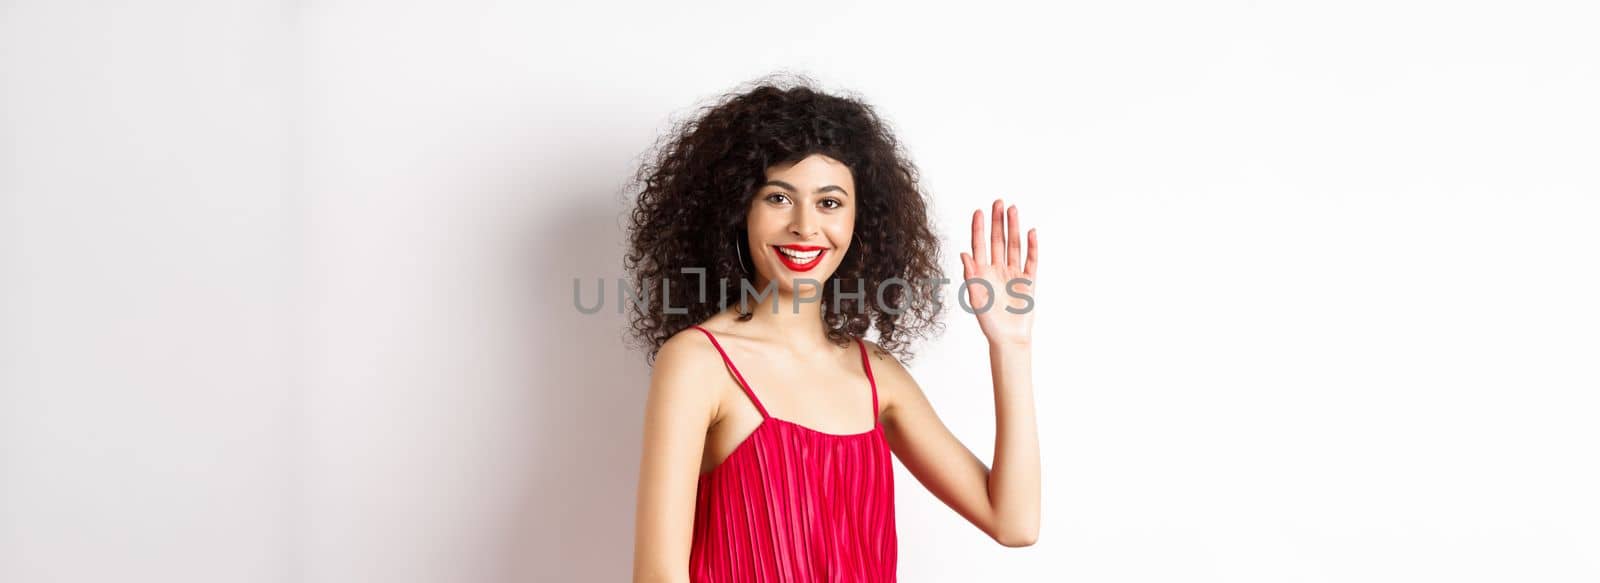 Beauty and fashion. Friendly elegant woman with curly hair, red dress, waving hand and saying hello, smiling to greet you, standing on white background.